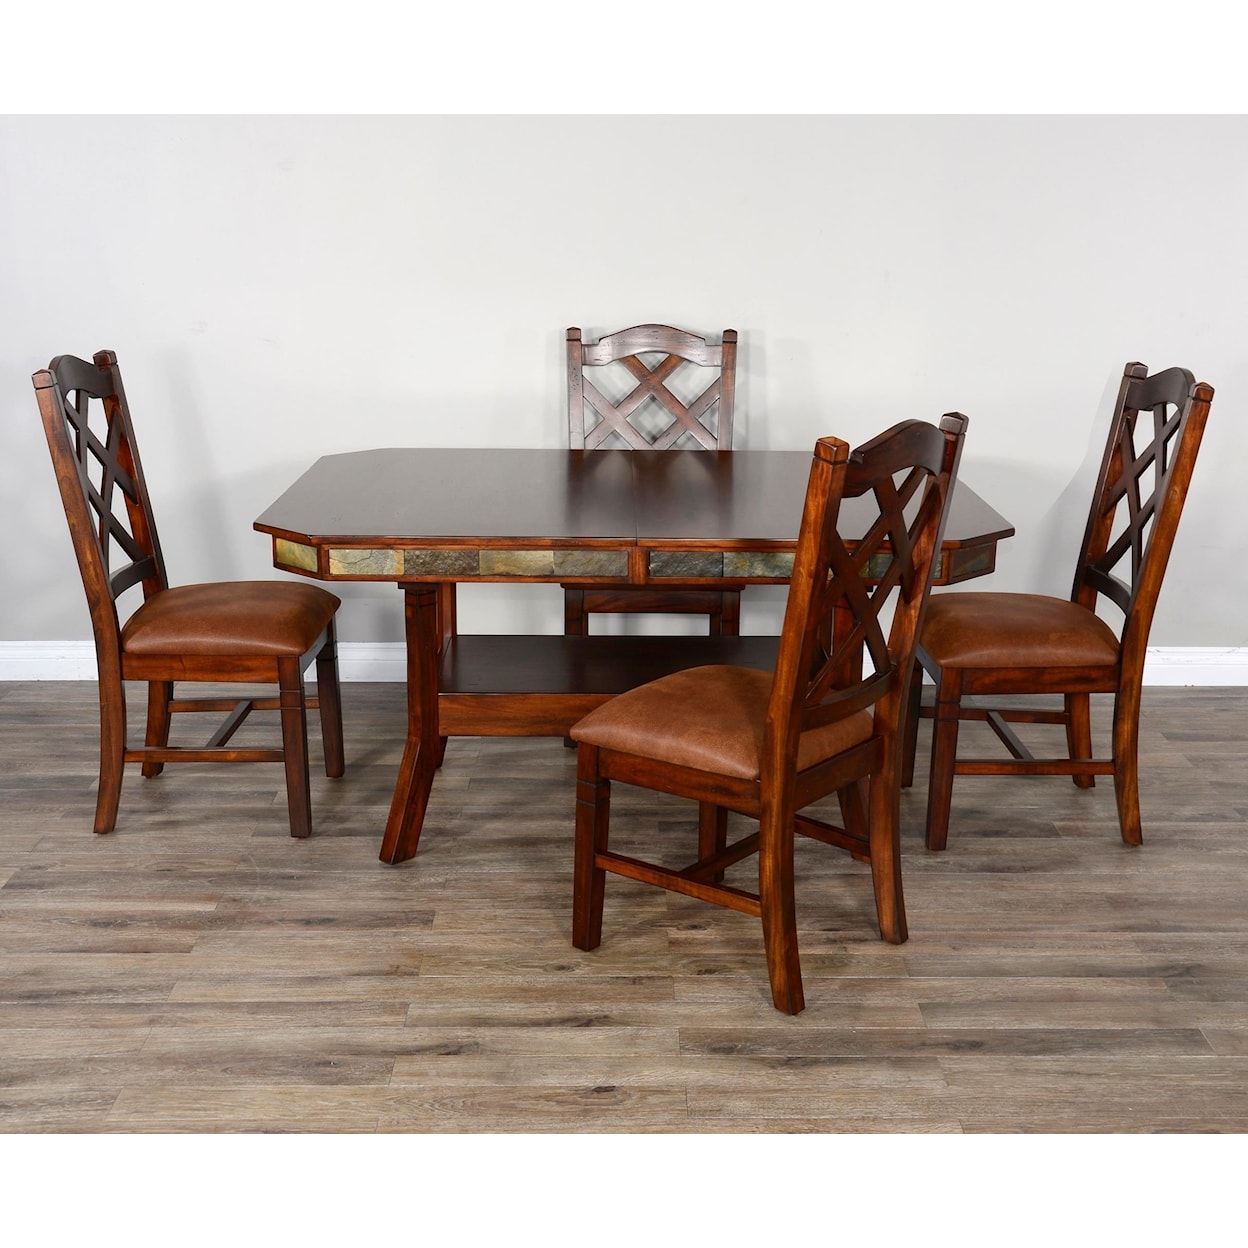 Sunny Designs Santa Fe 2 Dining Table and Chair Set 